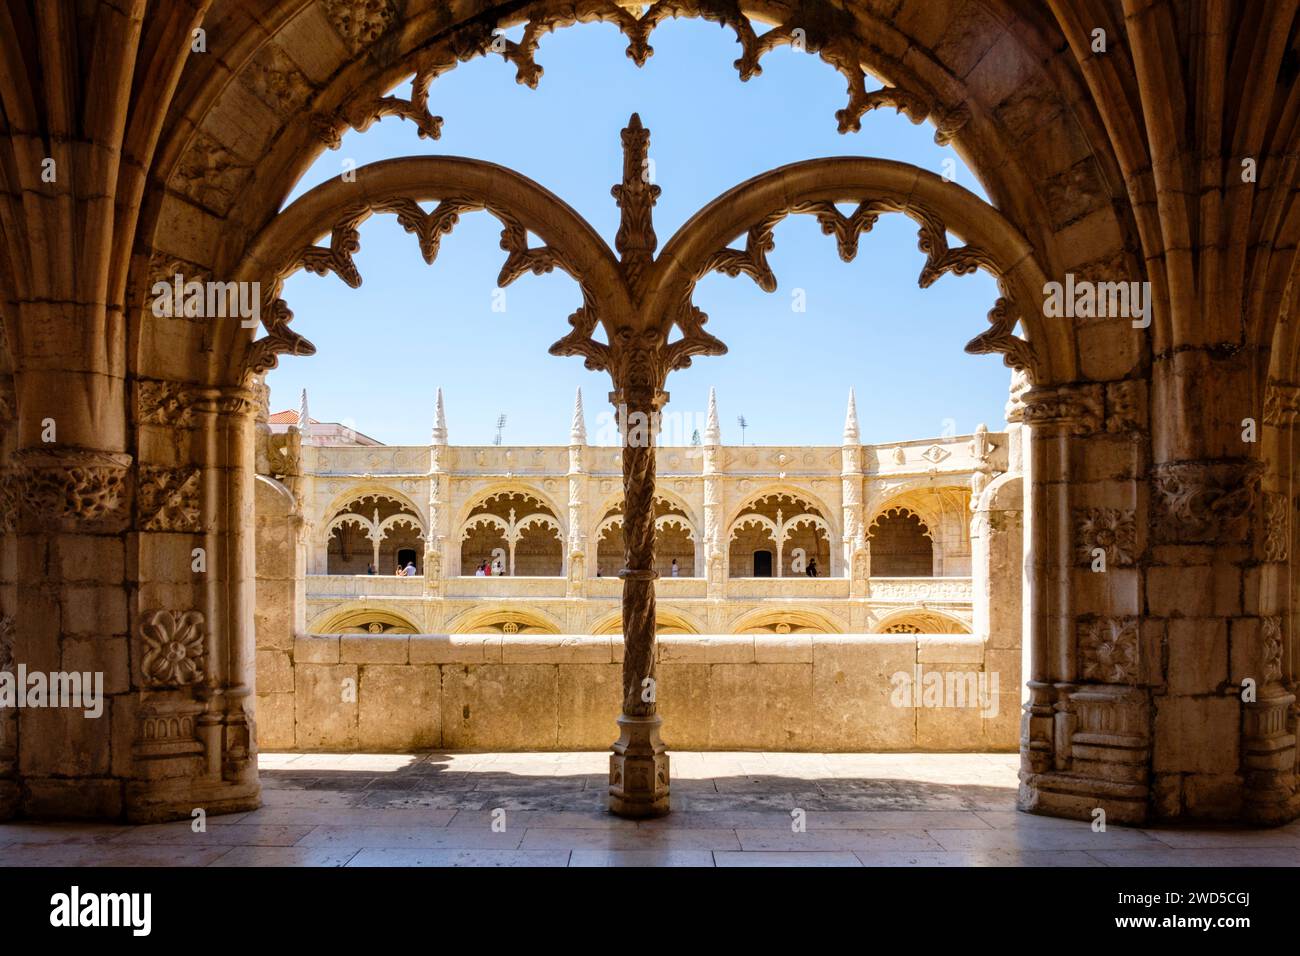 Interior view of archs and columns of Jeronimos Monastery, Mosteiro dos Jerónimos, late Portuguese Gothic Manueline style of architecture, Lisbon Stock Photo